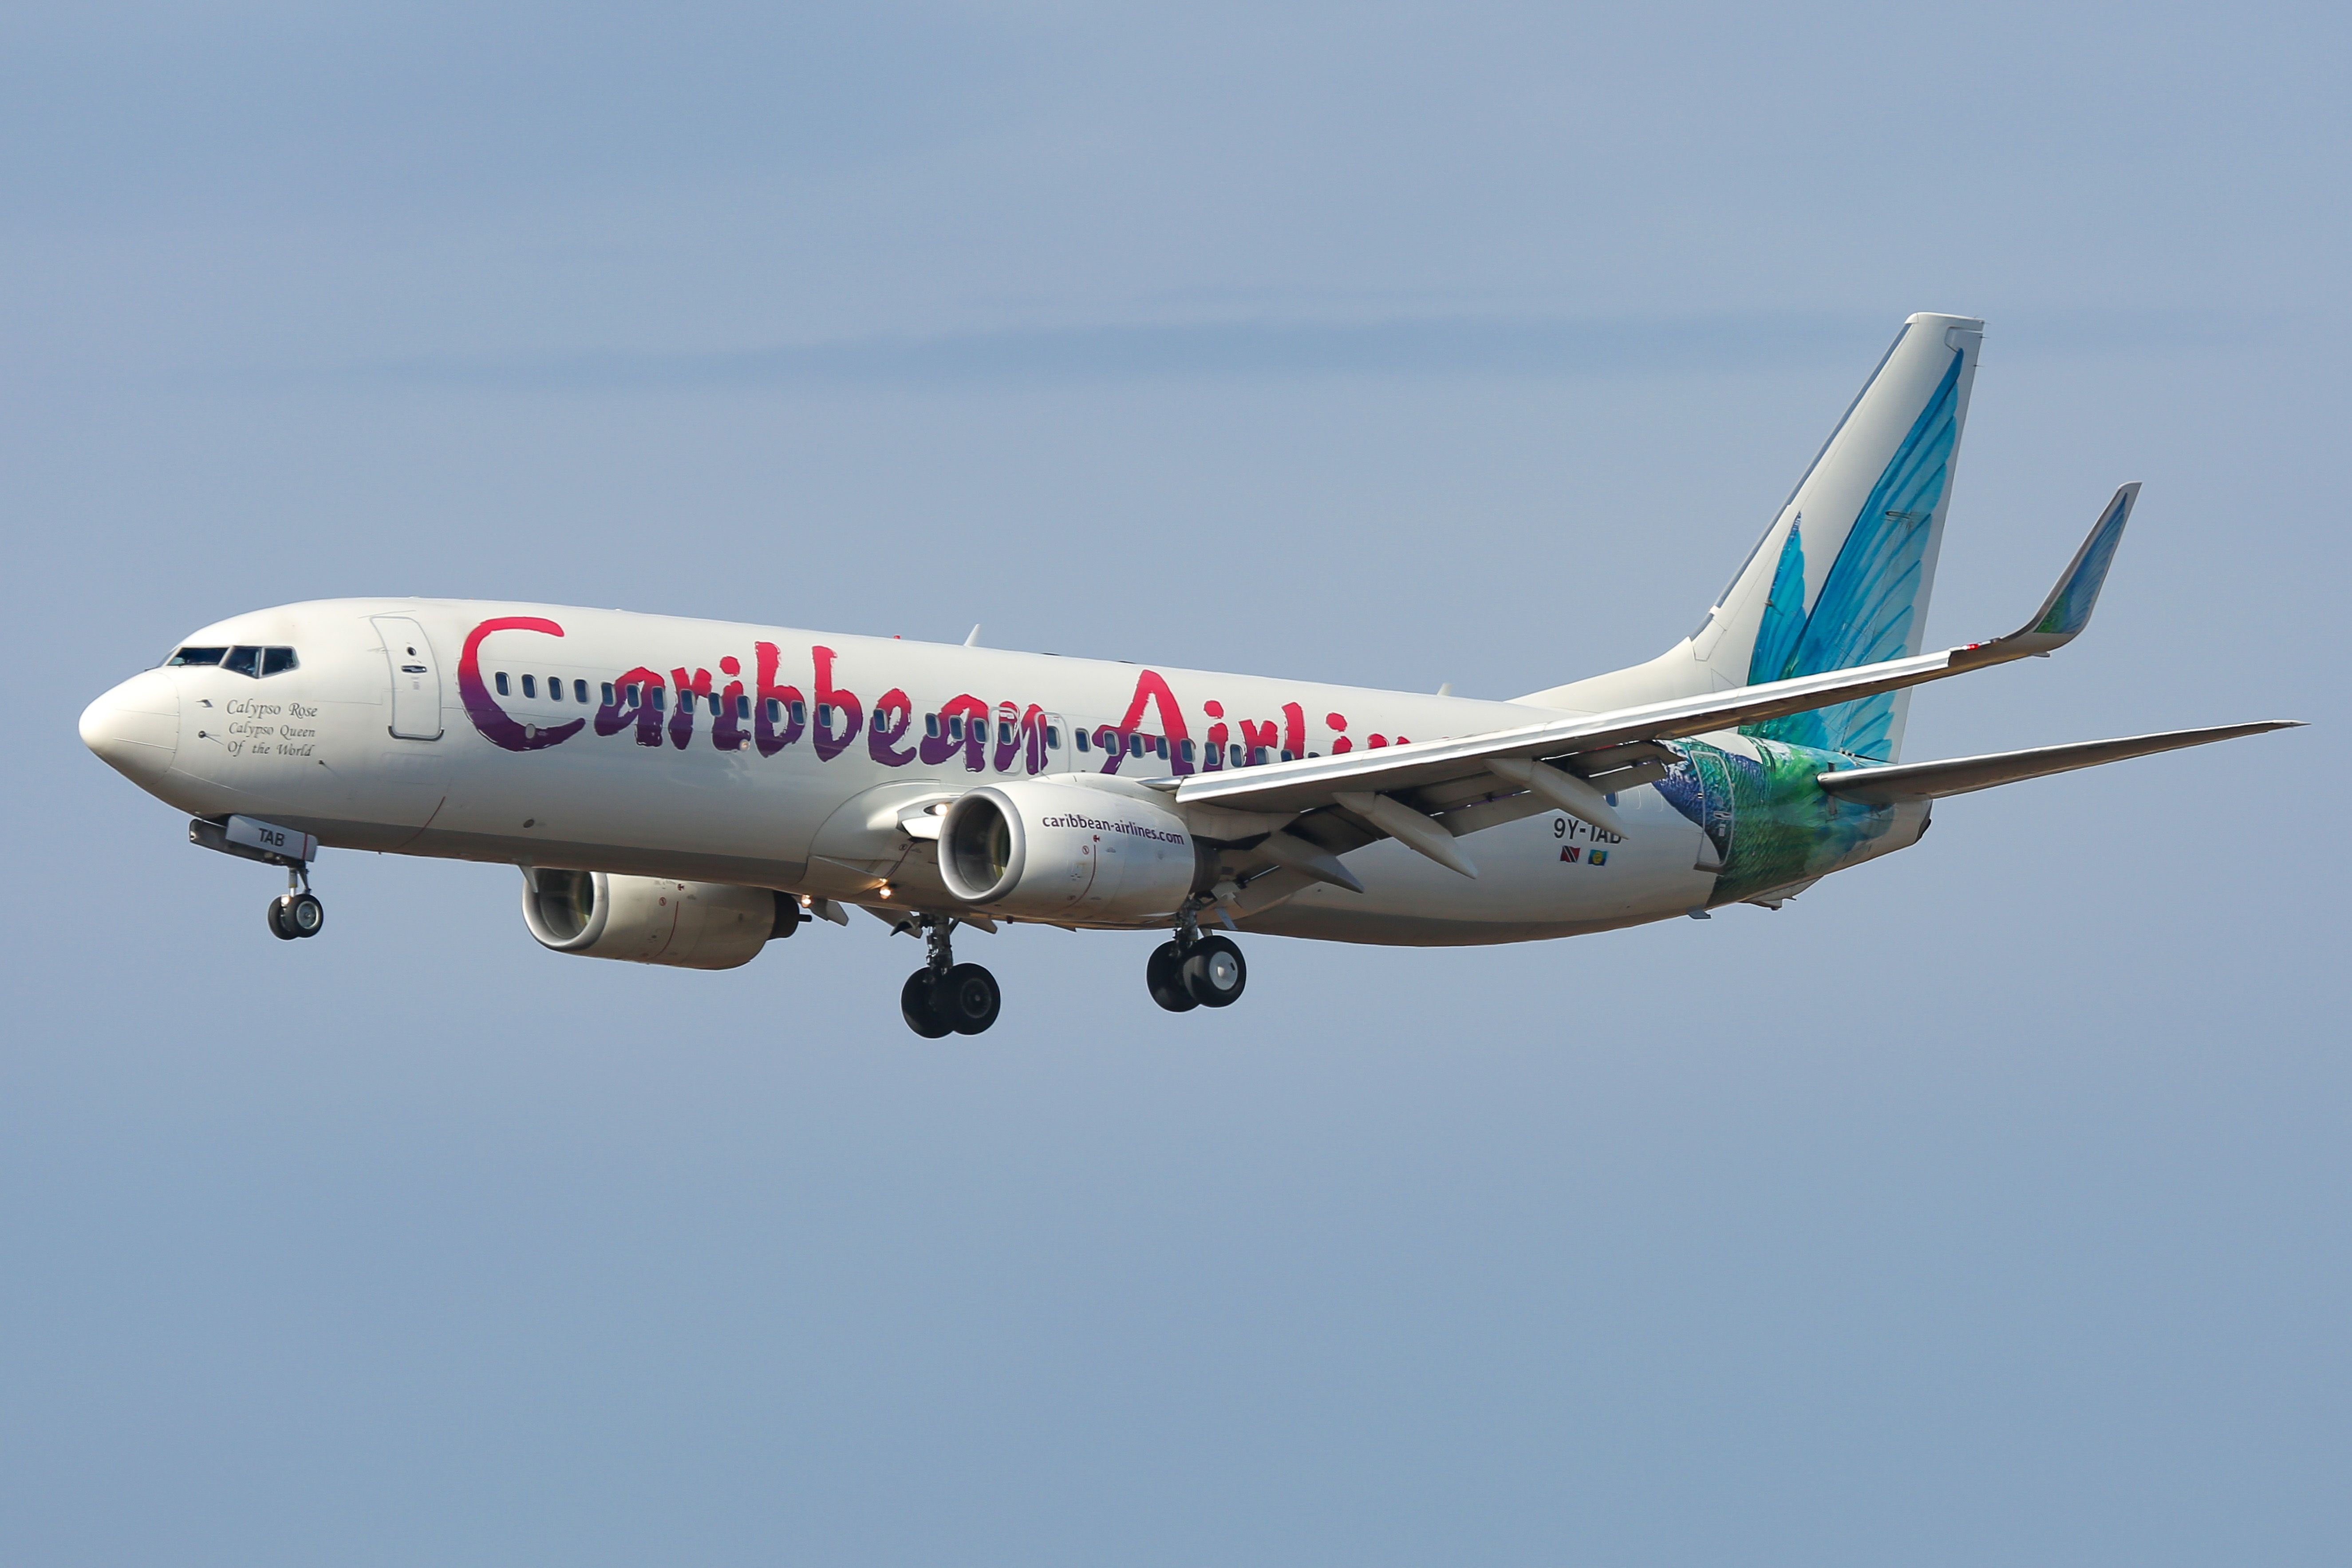 GettyImages-1213973707 Caribbean Airlines